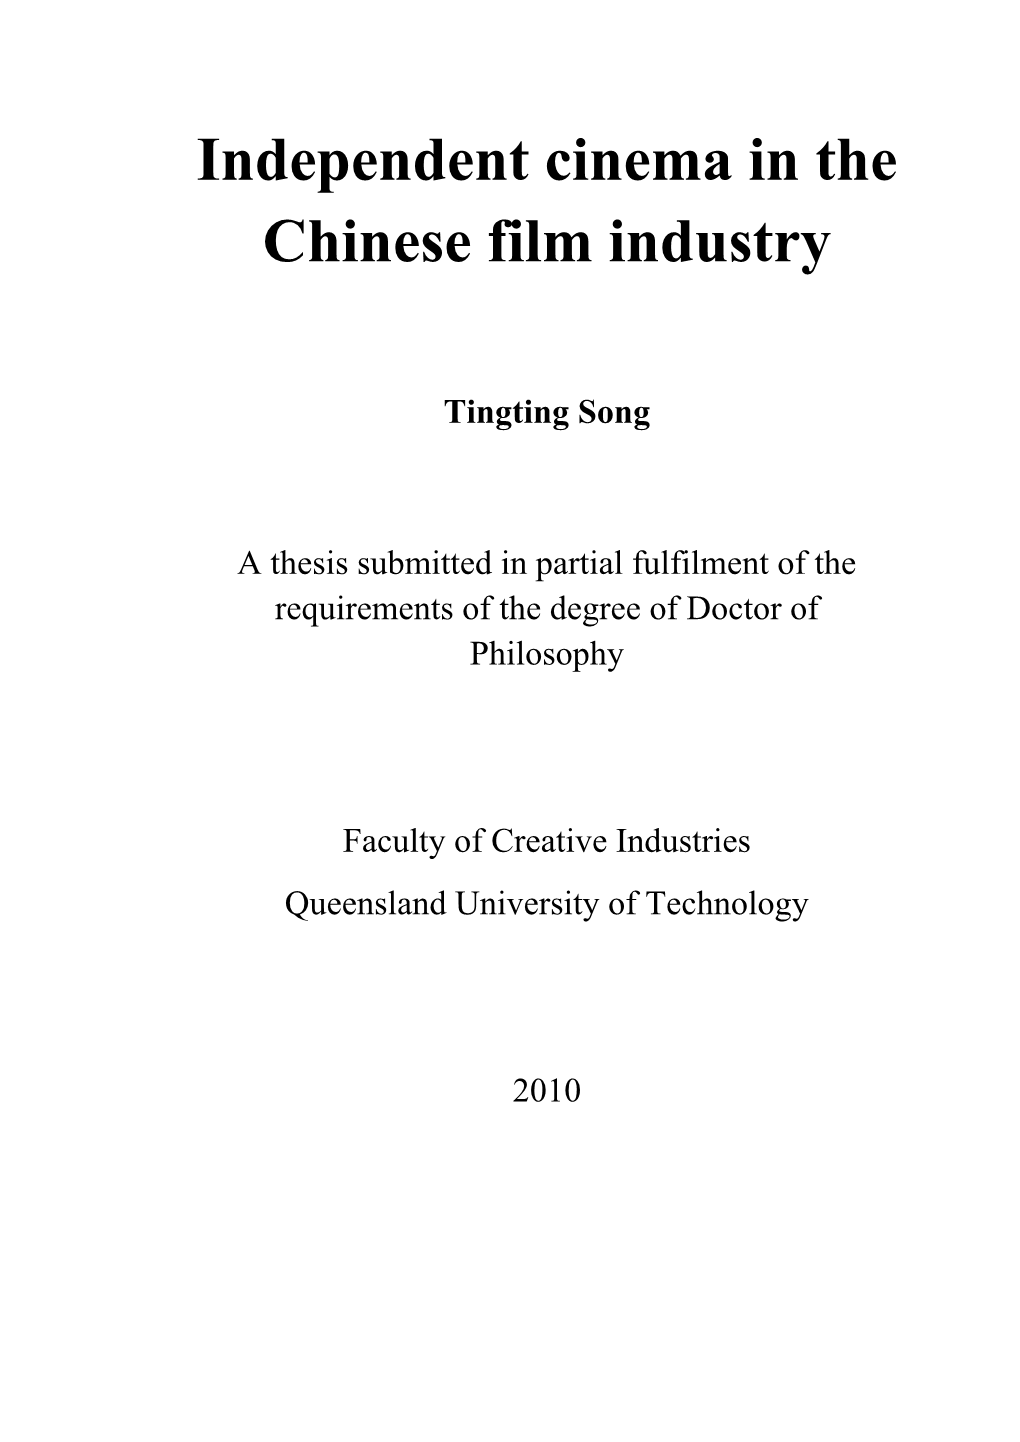 Independent Cinema in the Chinese Film Industry